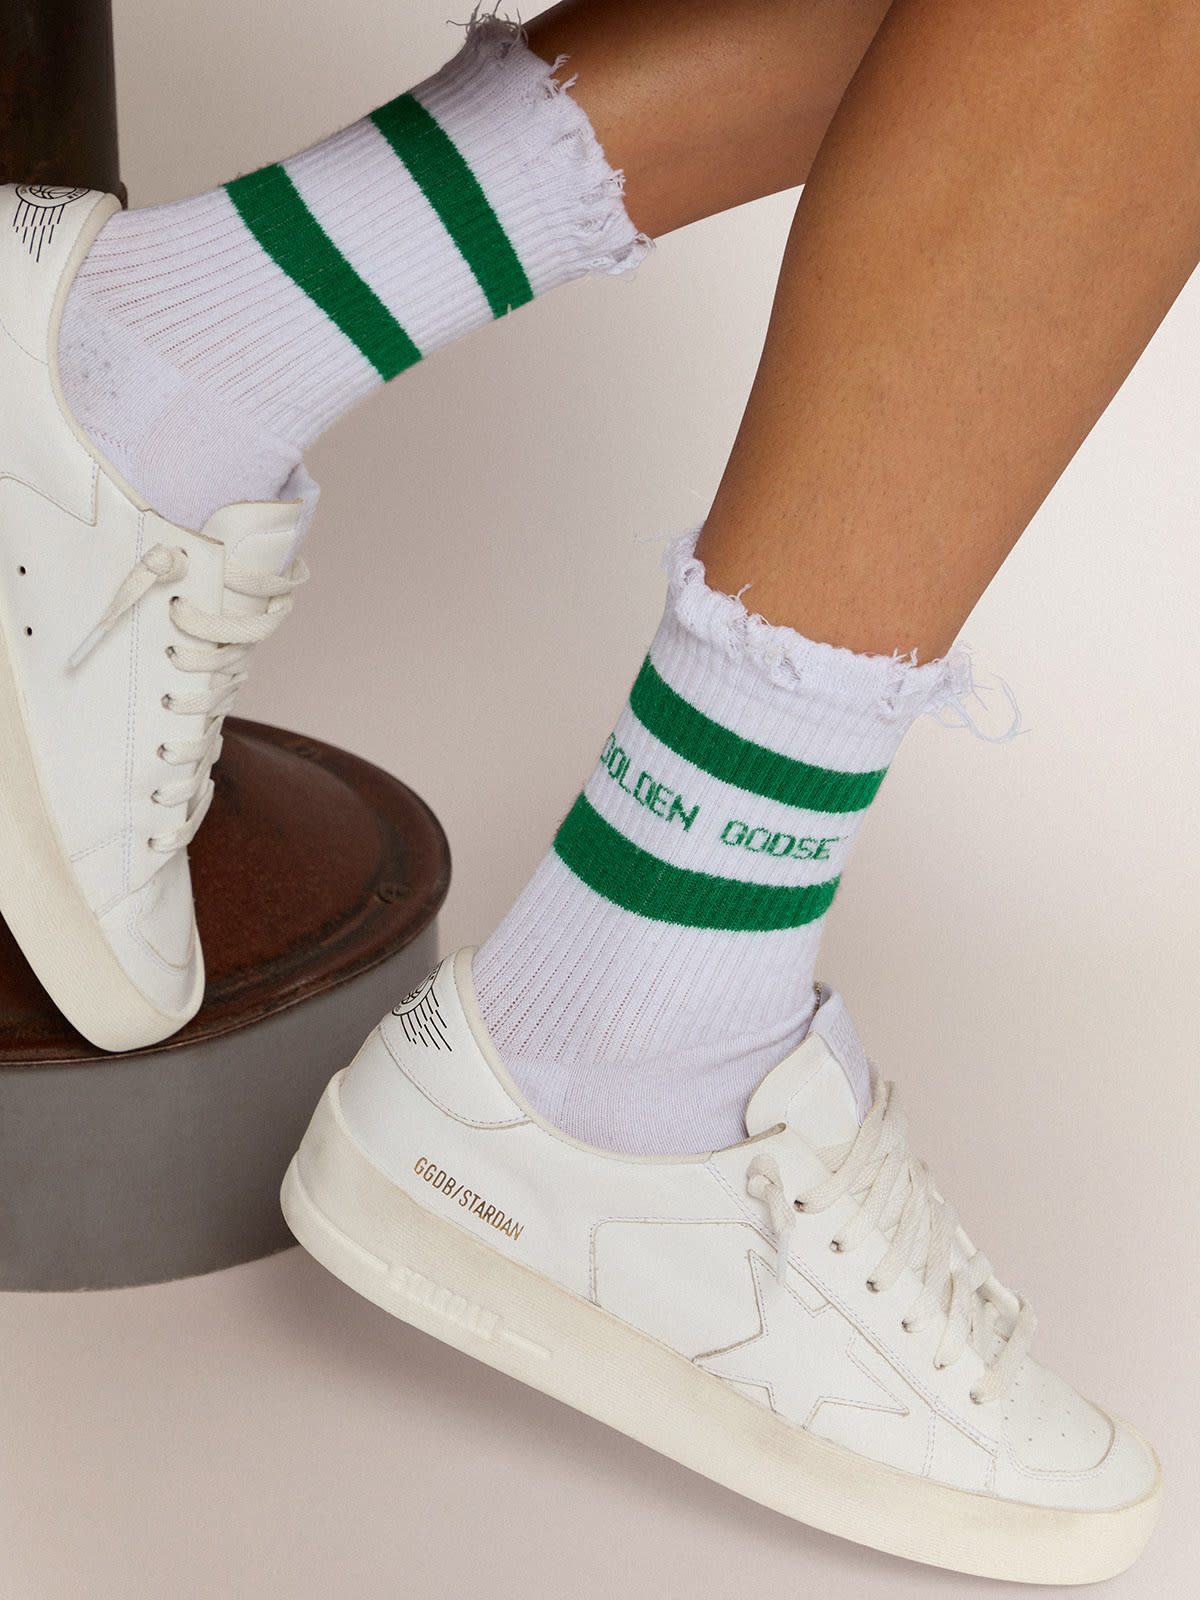 Golden Goose - Cotton socks with distressed finishes, green stripes and logo   in 